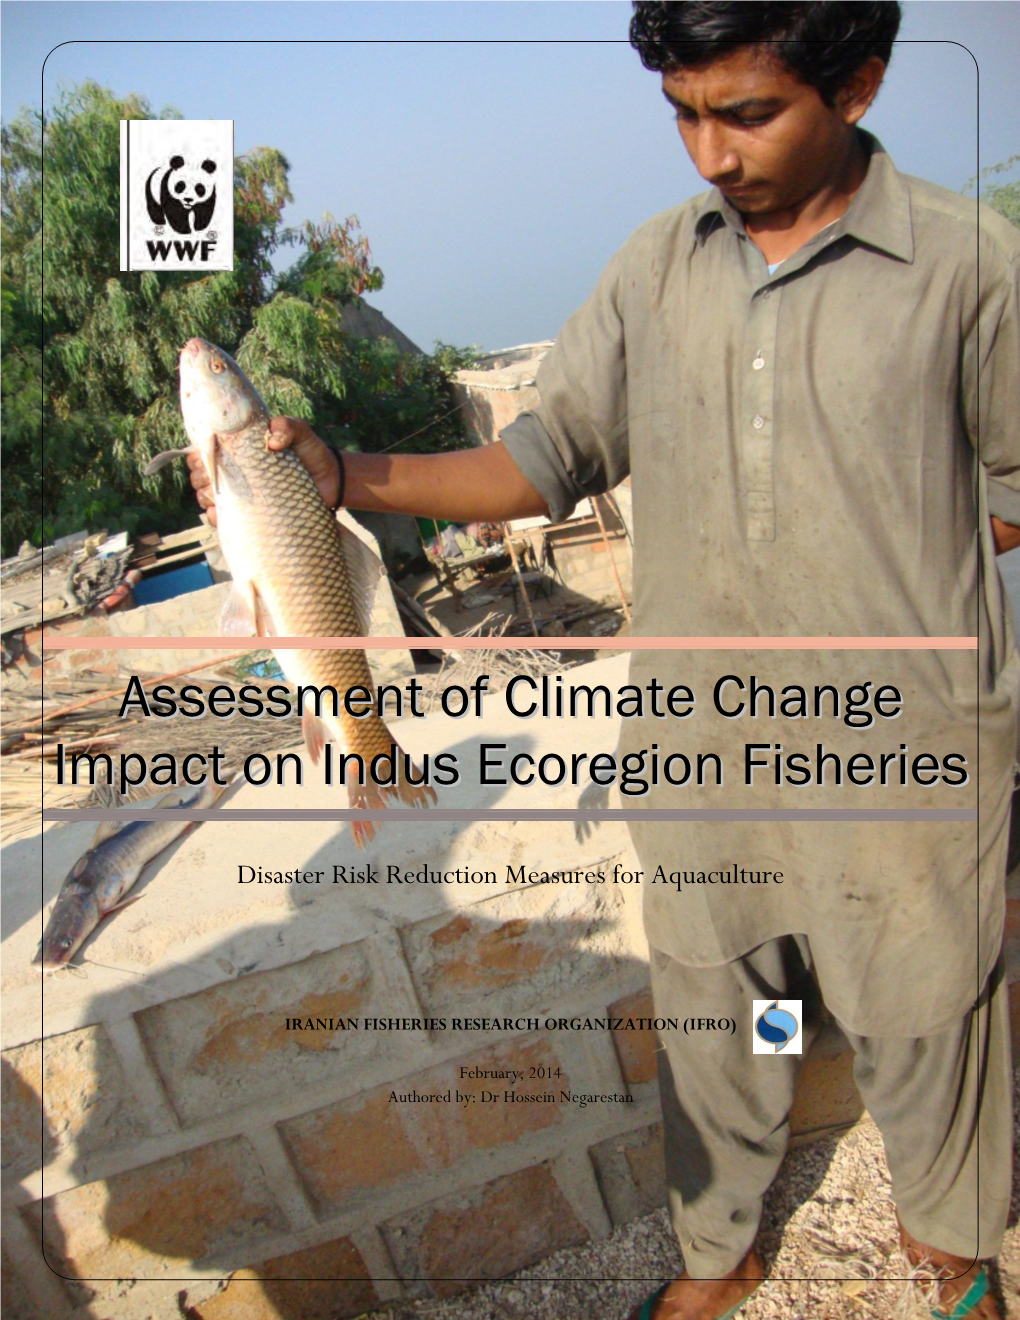 Assessment of Climate Change Impact on Indus Ecoregion Fisheries